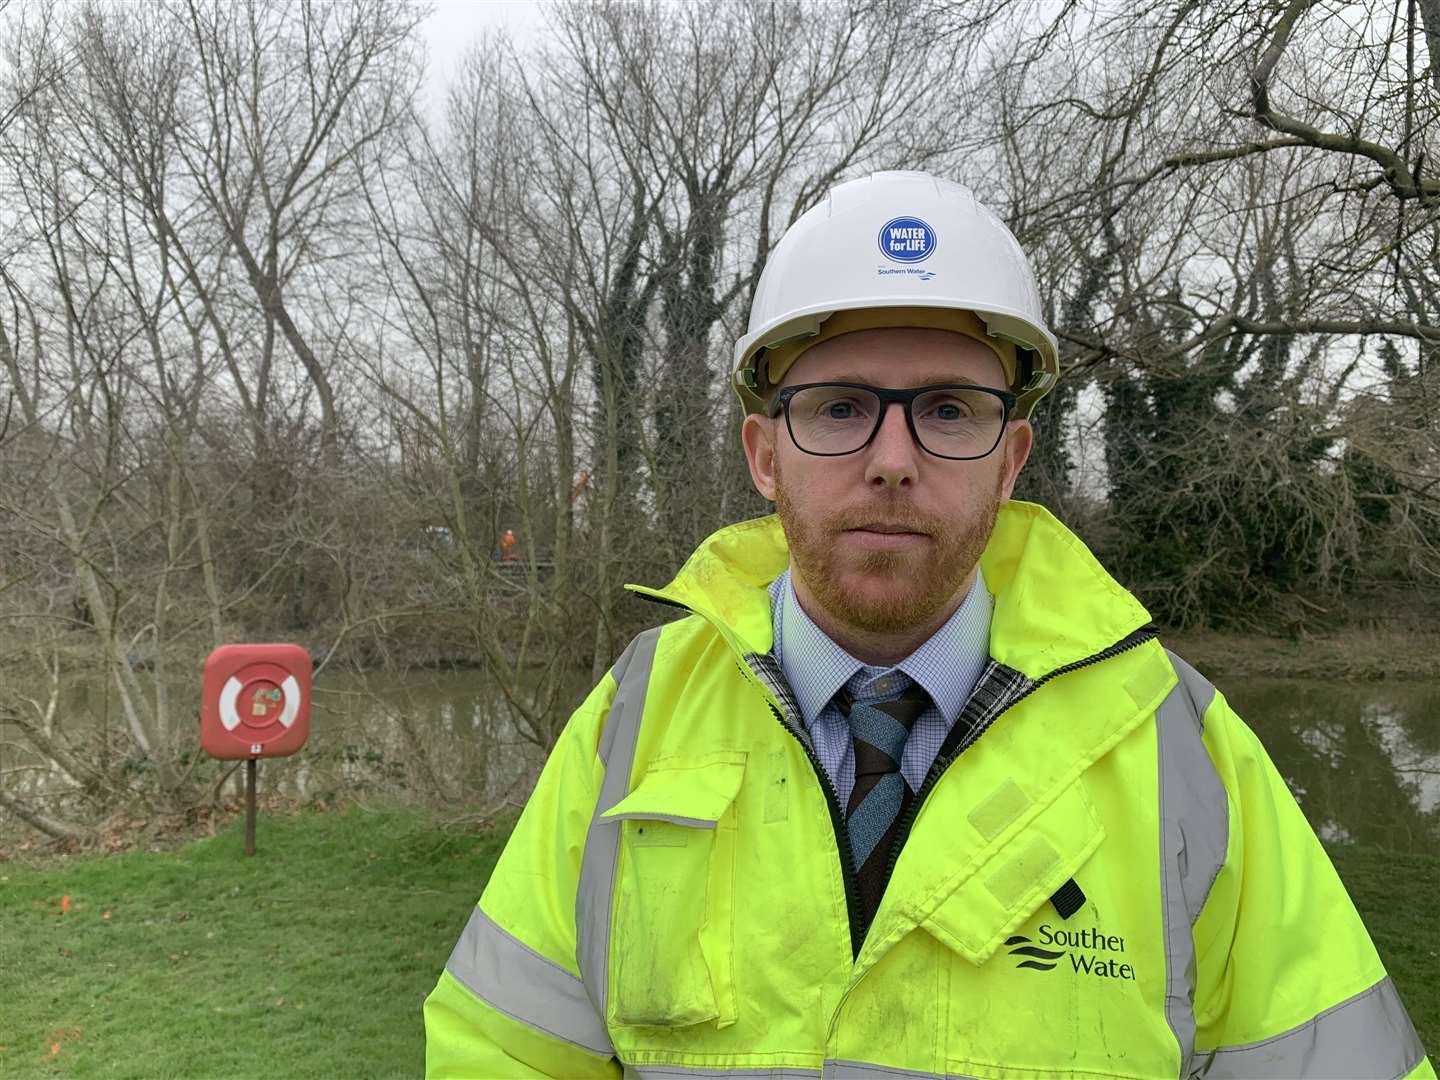 Southern Water's operational area manager Jean-Paul Collet in Sandwich